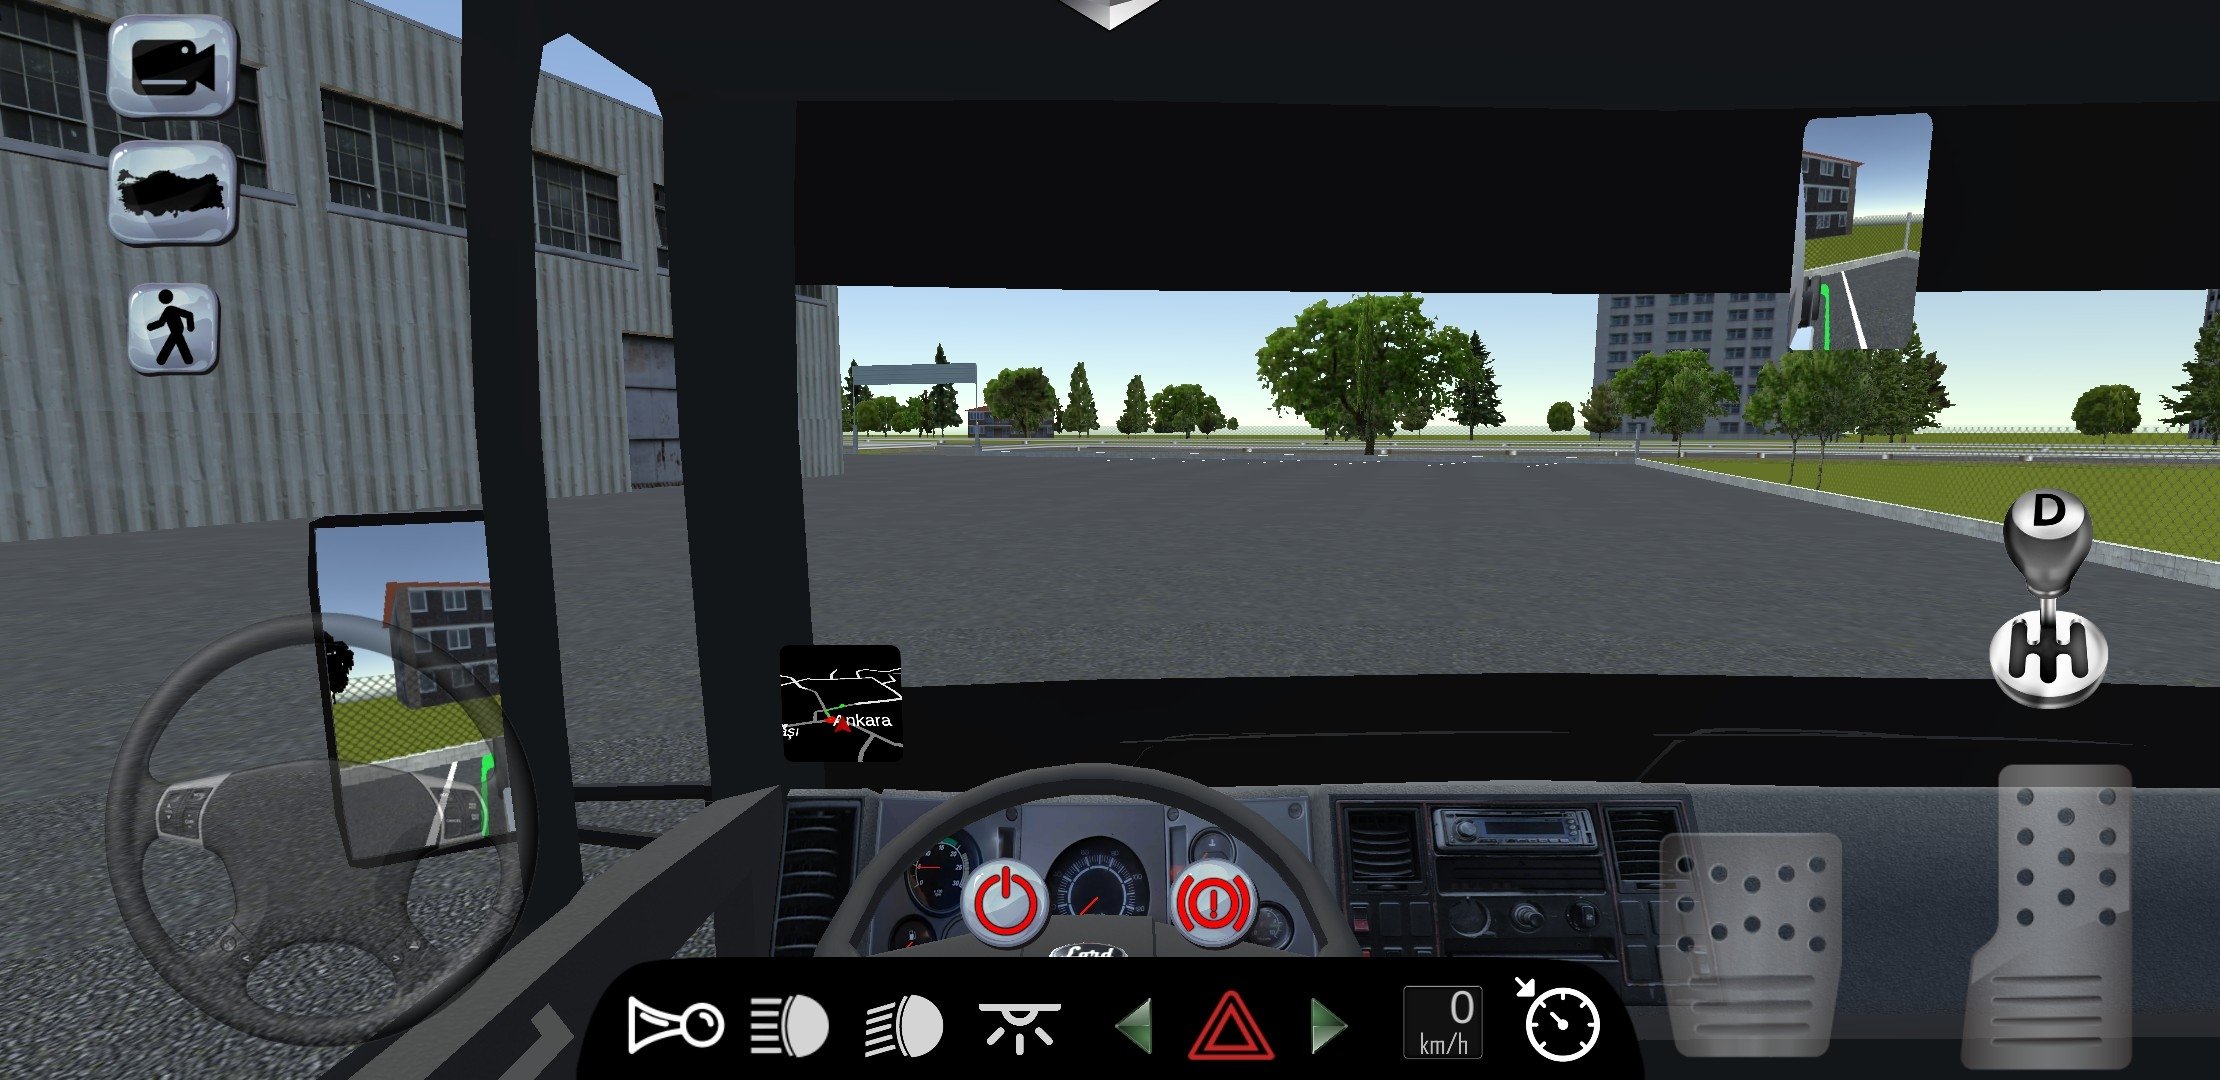 Cargo Simulator 2023 instal the new version for iphone